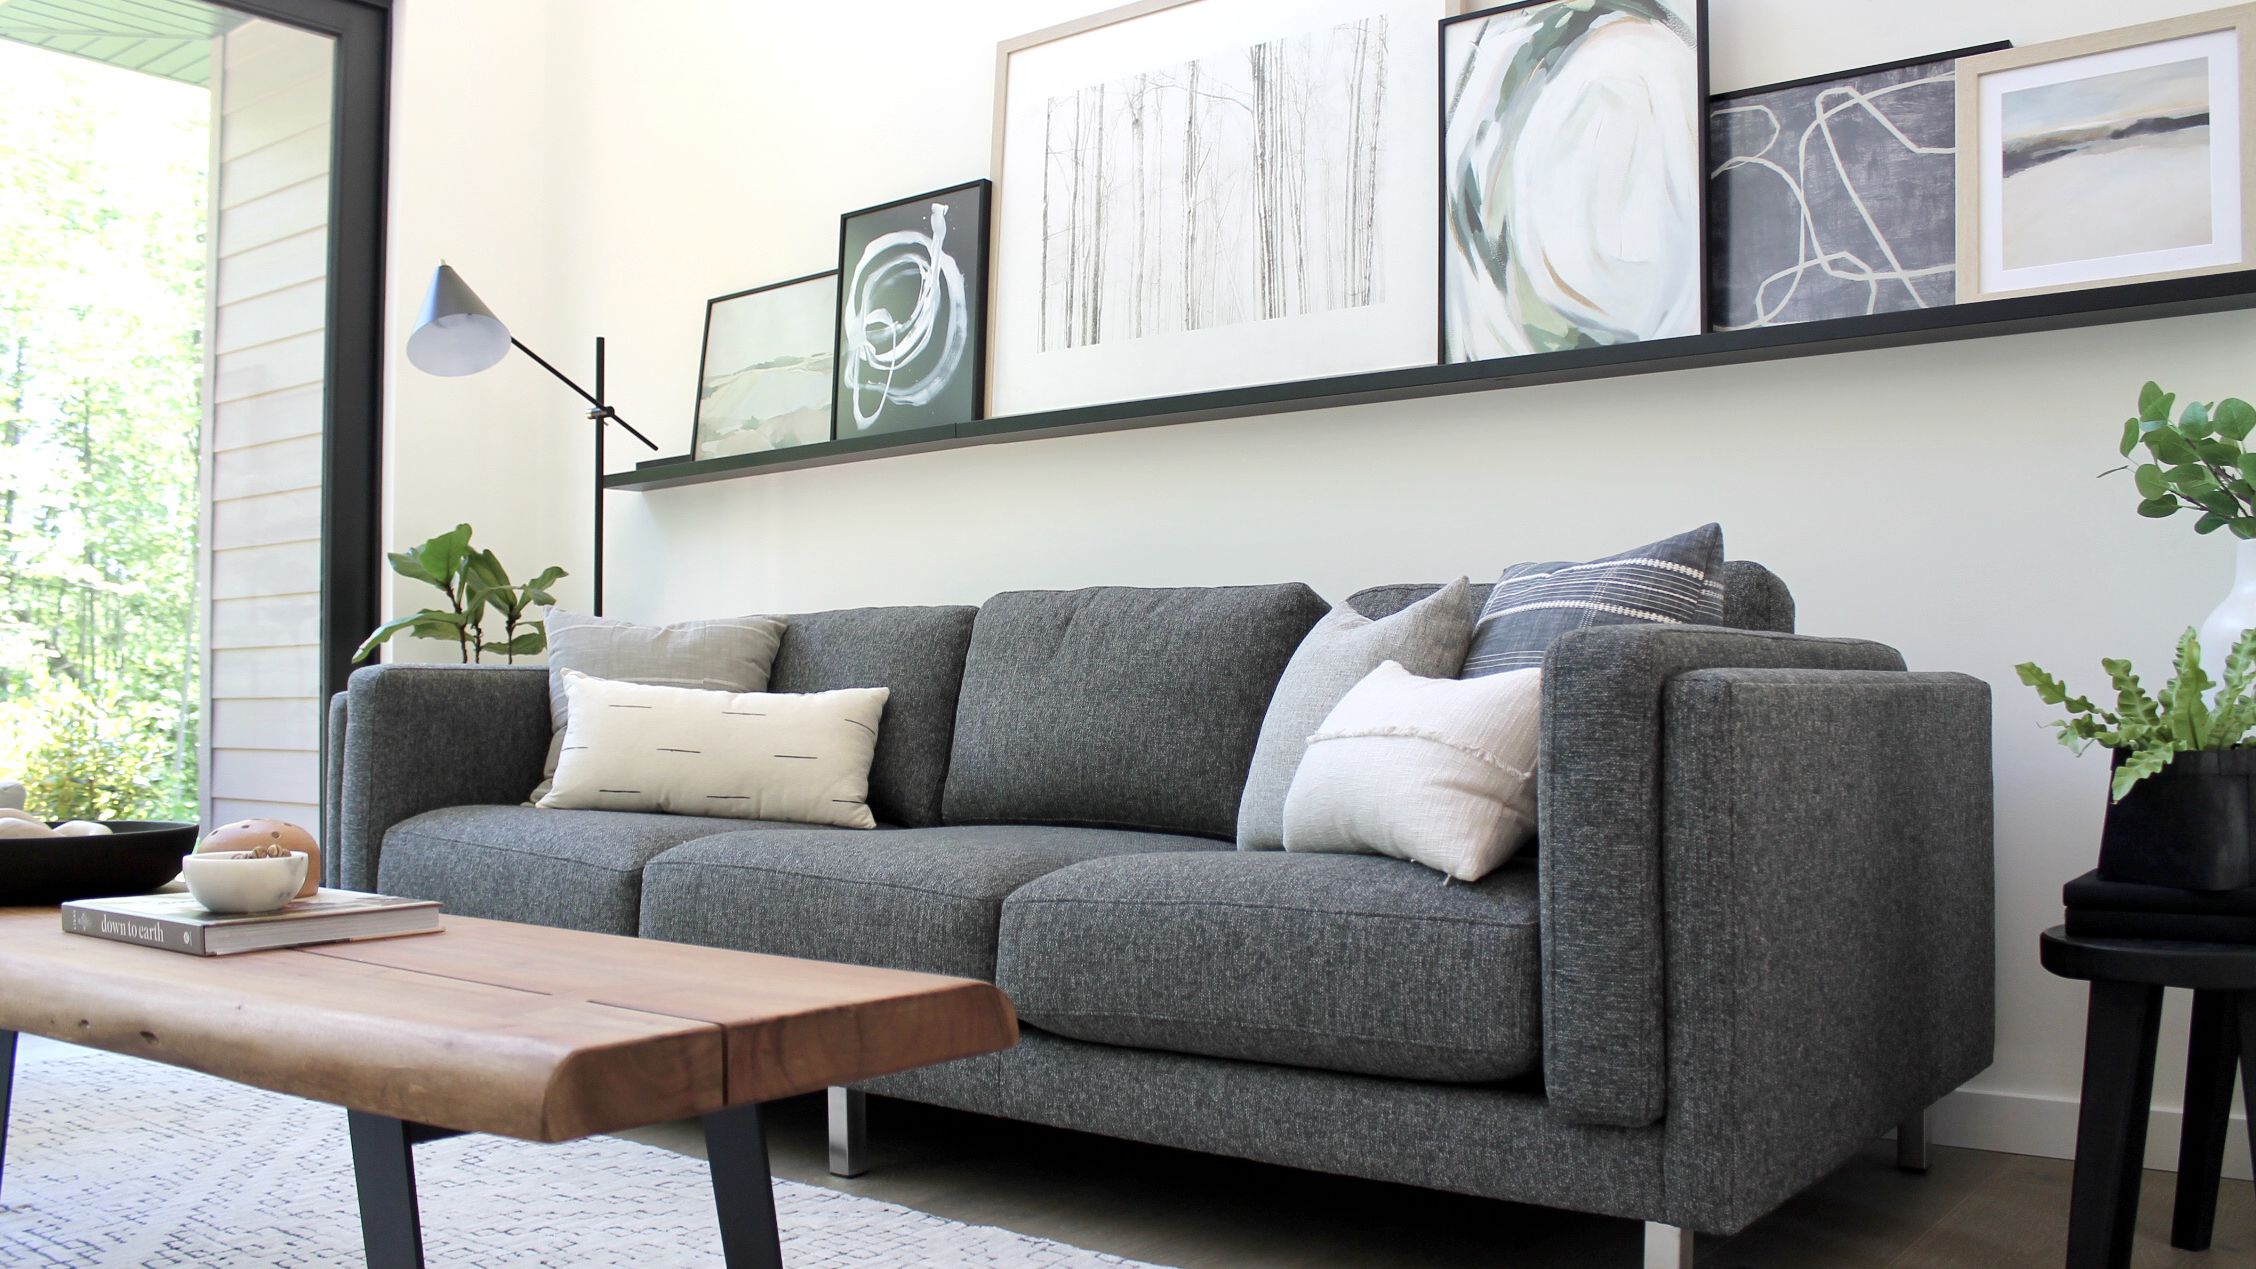 What To Look For When Choosing A Sofa